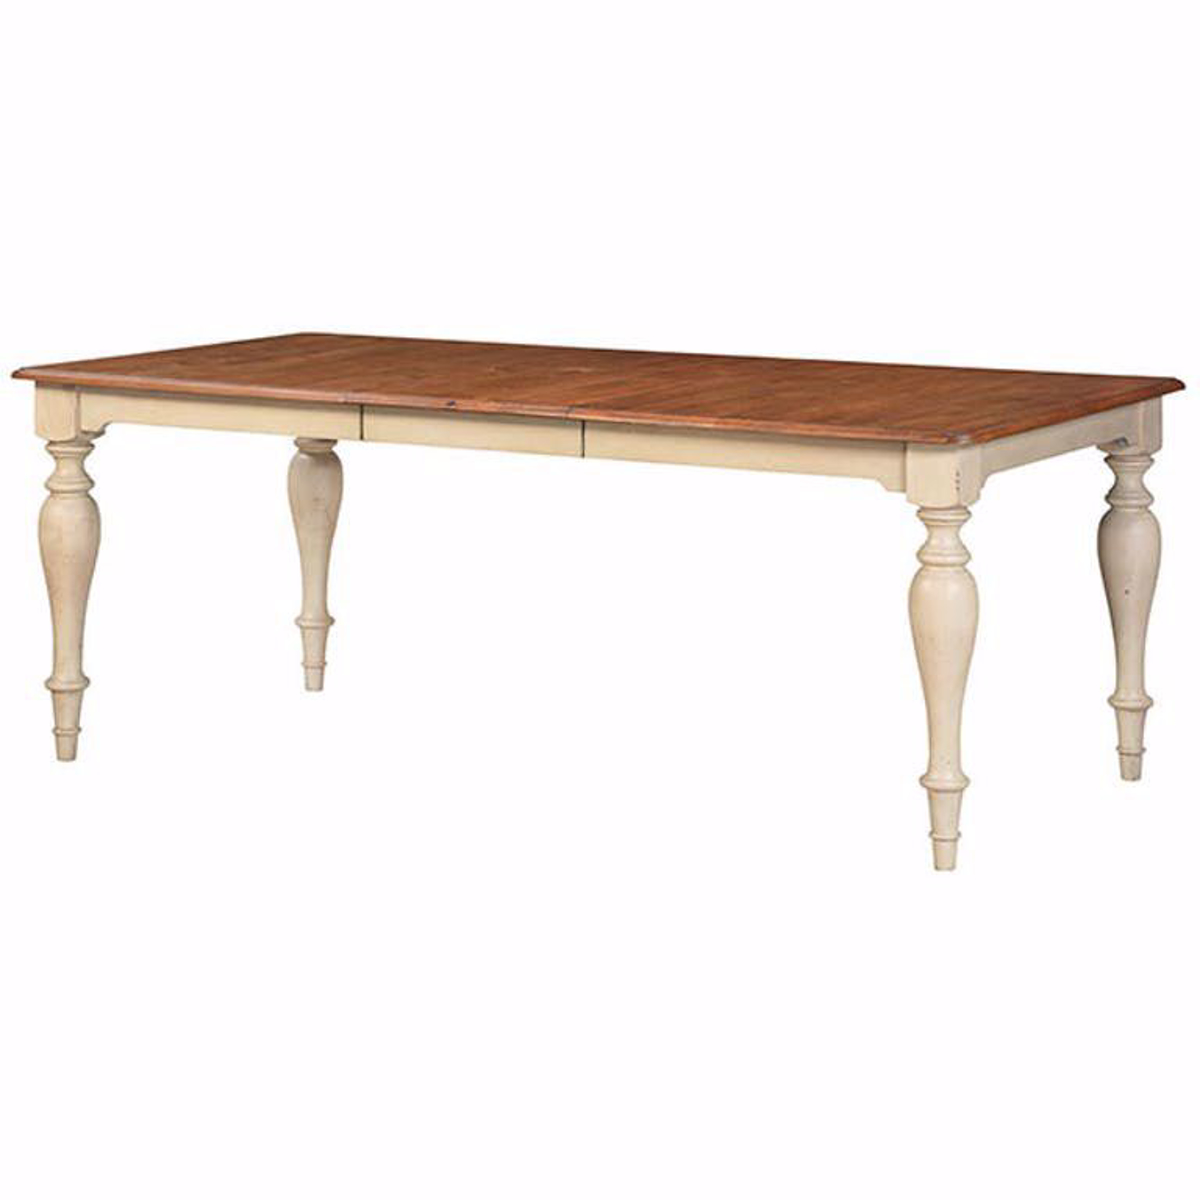 Picture of Devonshire Dining Table In Honey